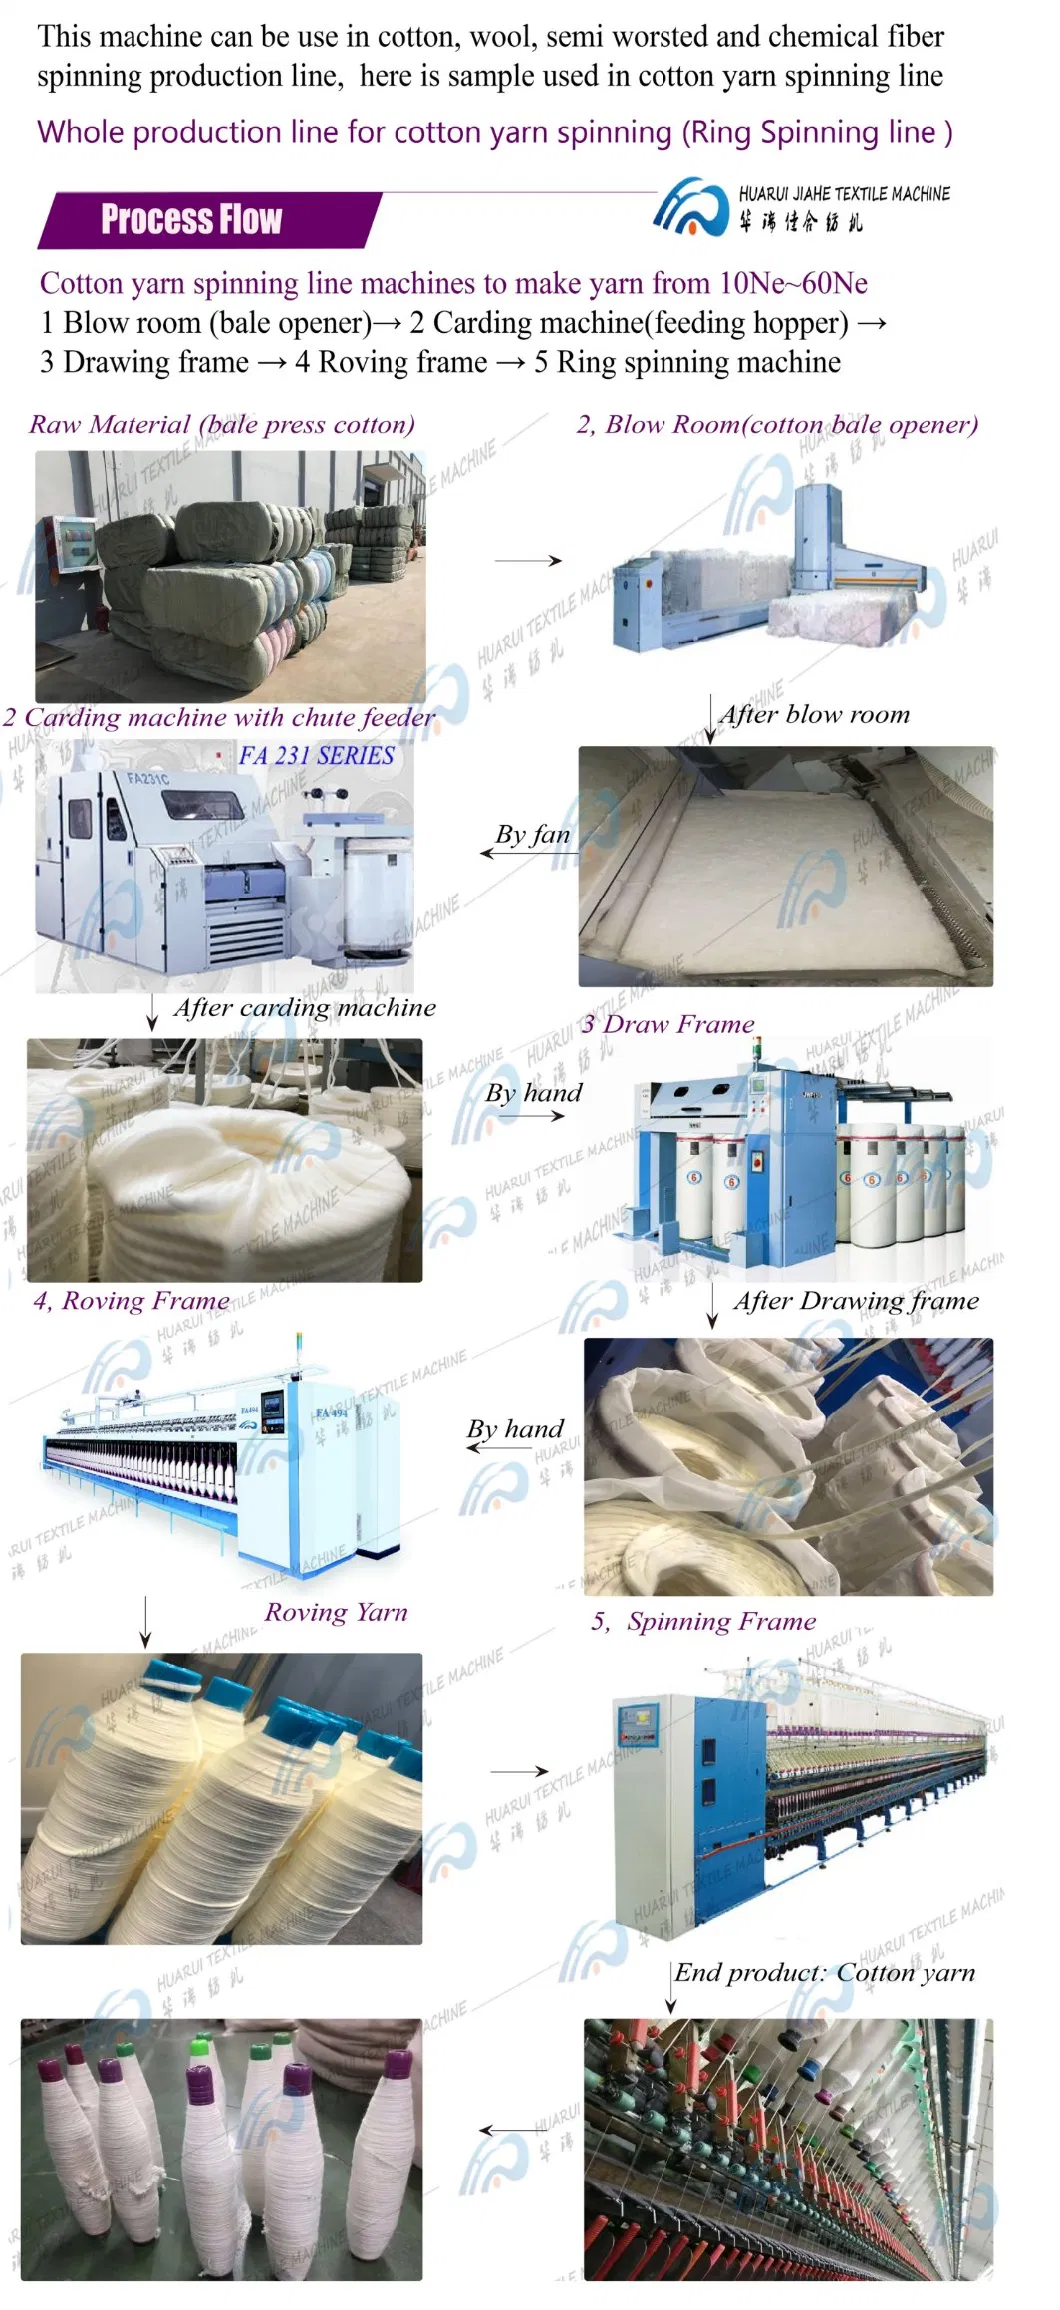 Factory Supplier Dyeing Machine for Samples Exported to Worldwidecheap China Wholesale Clothing Agent Morrison Rope Dyeing Machine